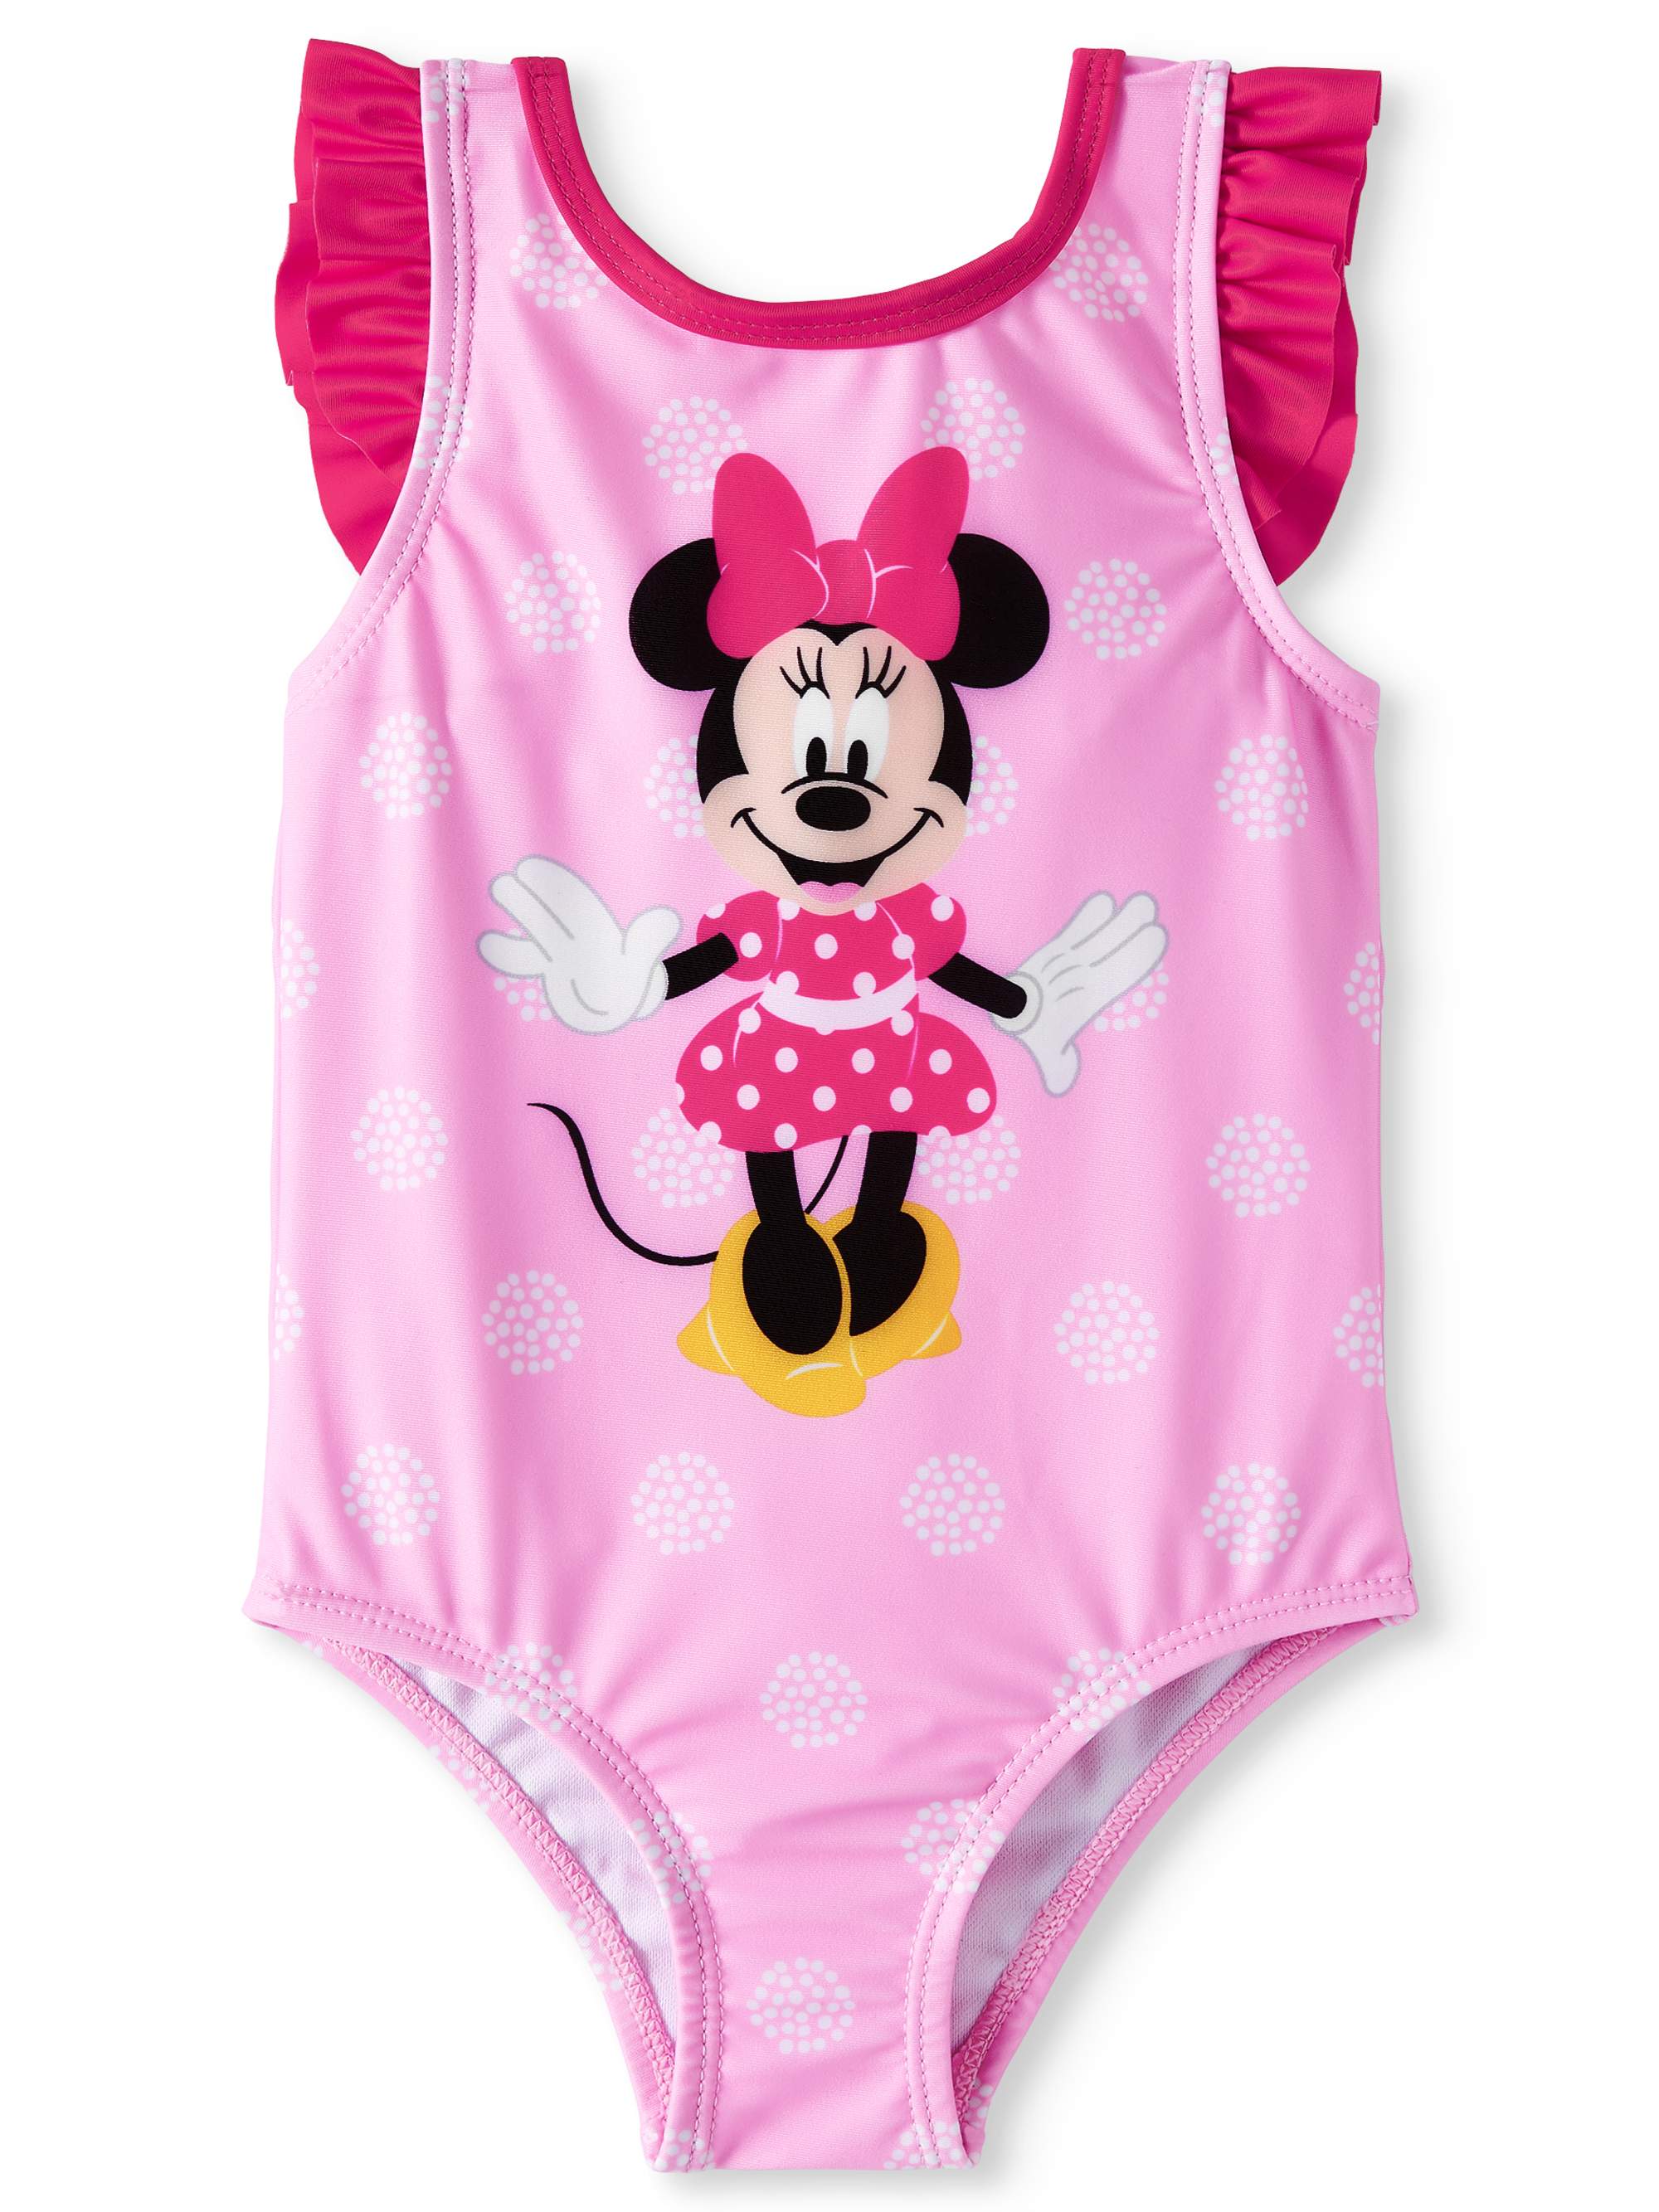 Minnie Mouse Baby Girl Ruffle One-Piece Swimsuit - image 1 of 3